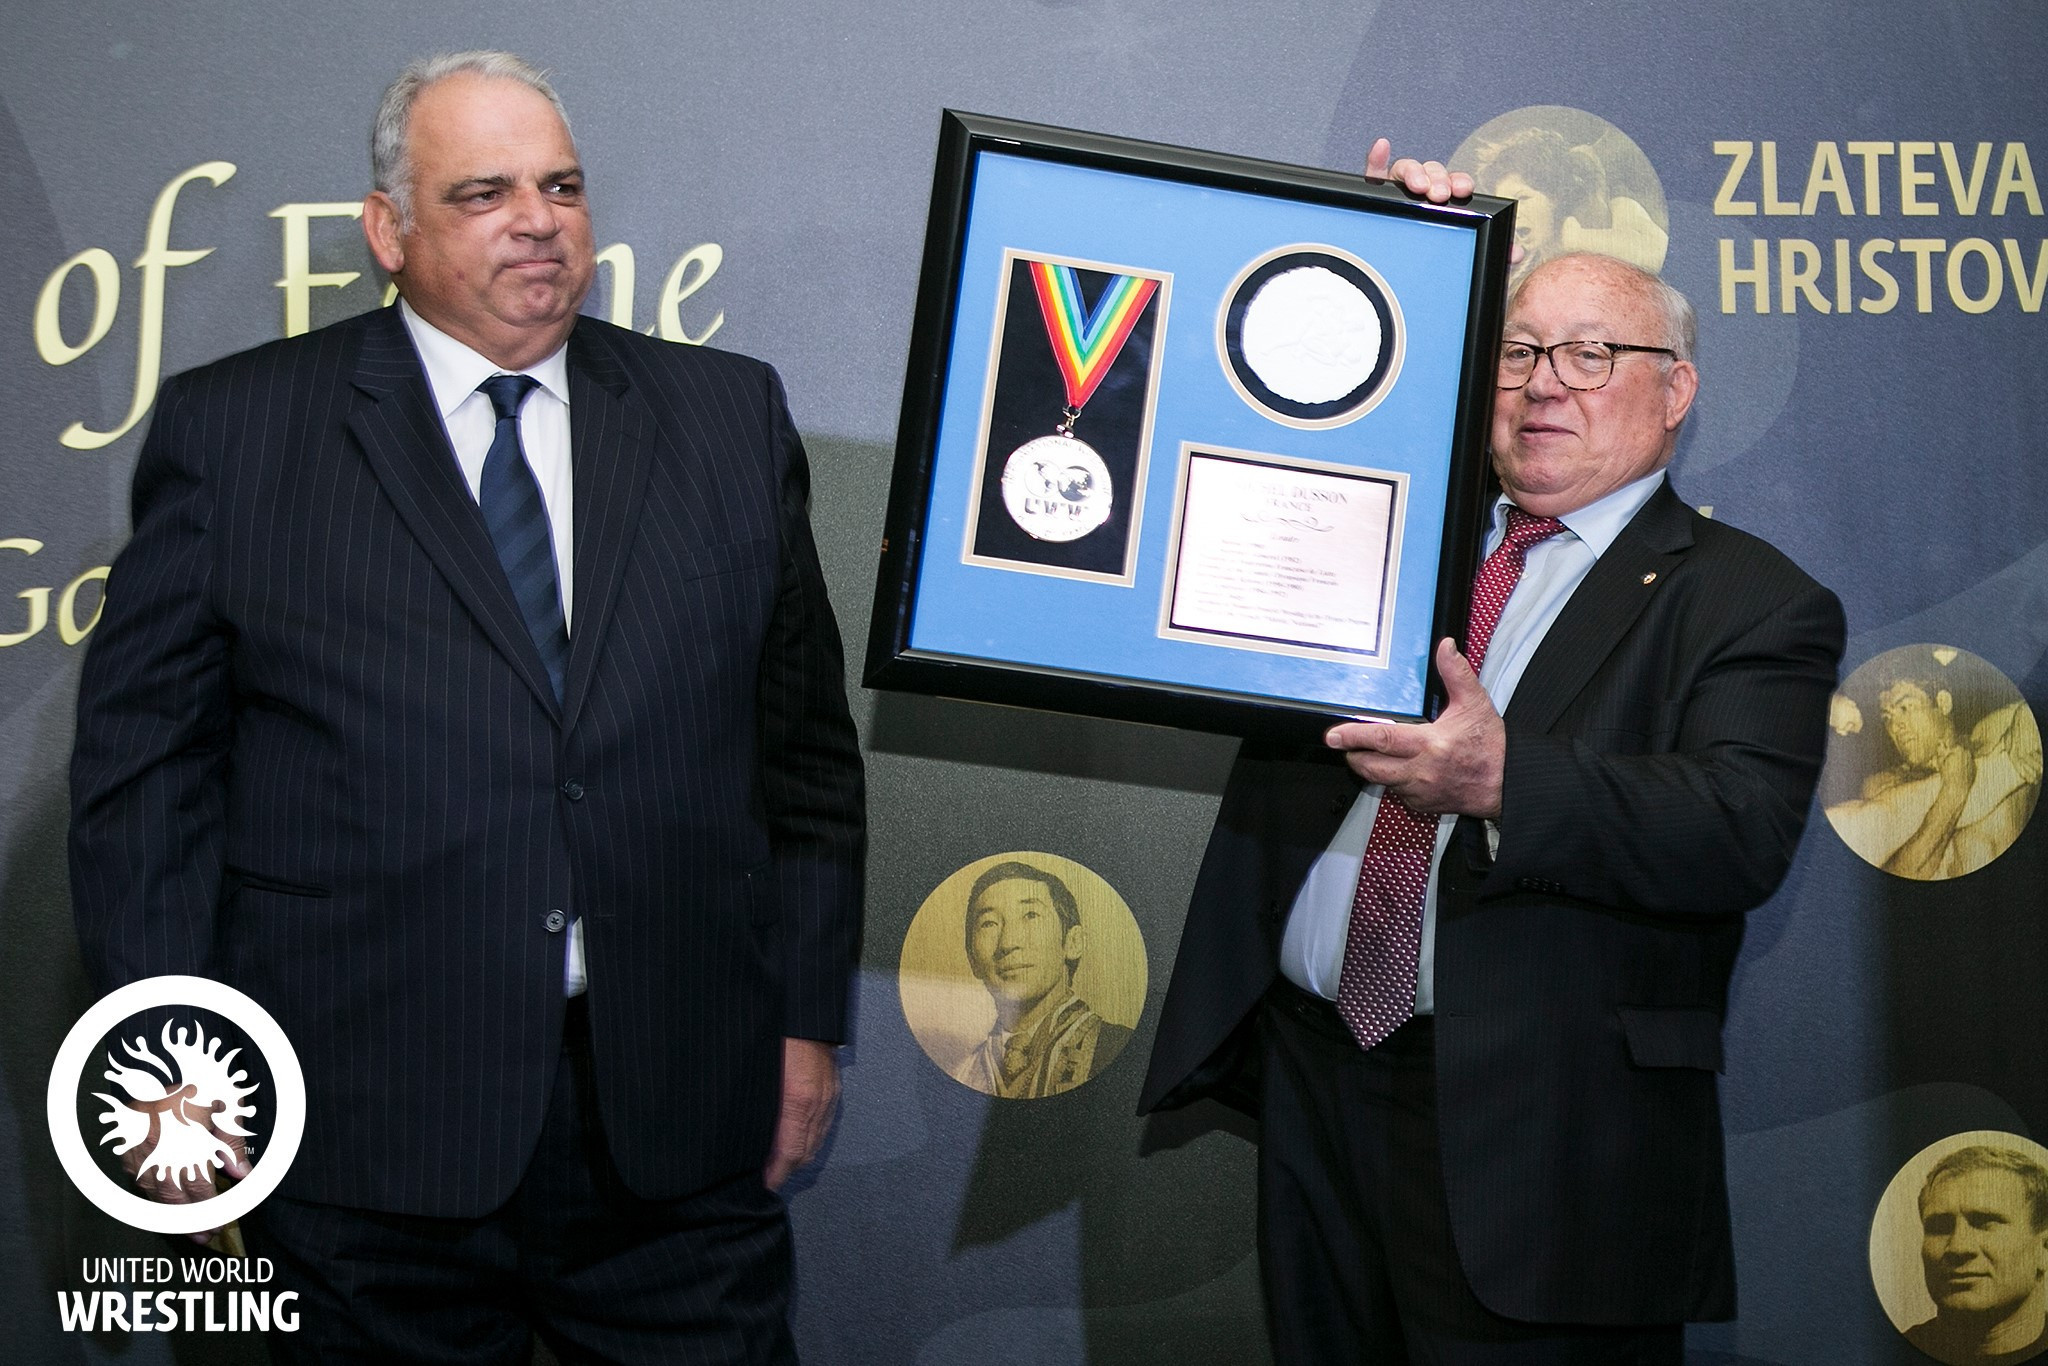 United World Wrestling secretary general Michel Dusson was inducted into the wrestling Hall of Fame on Friday (October 19) ©UWW